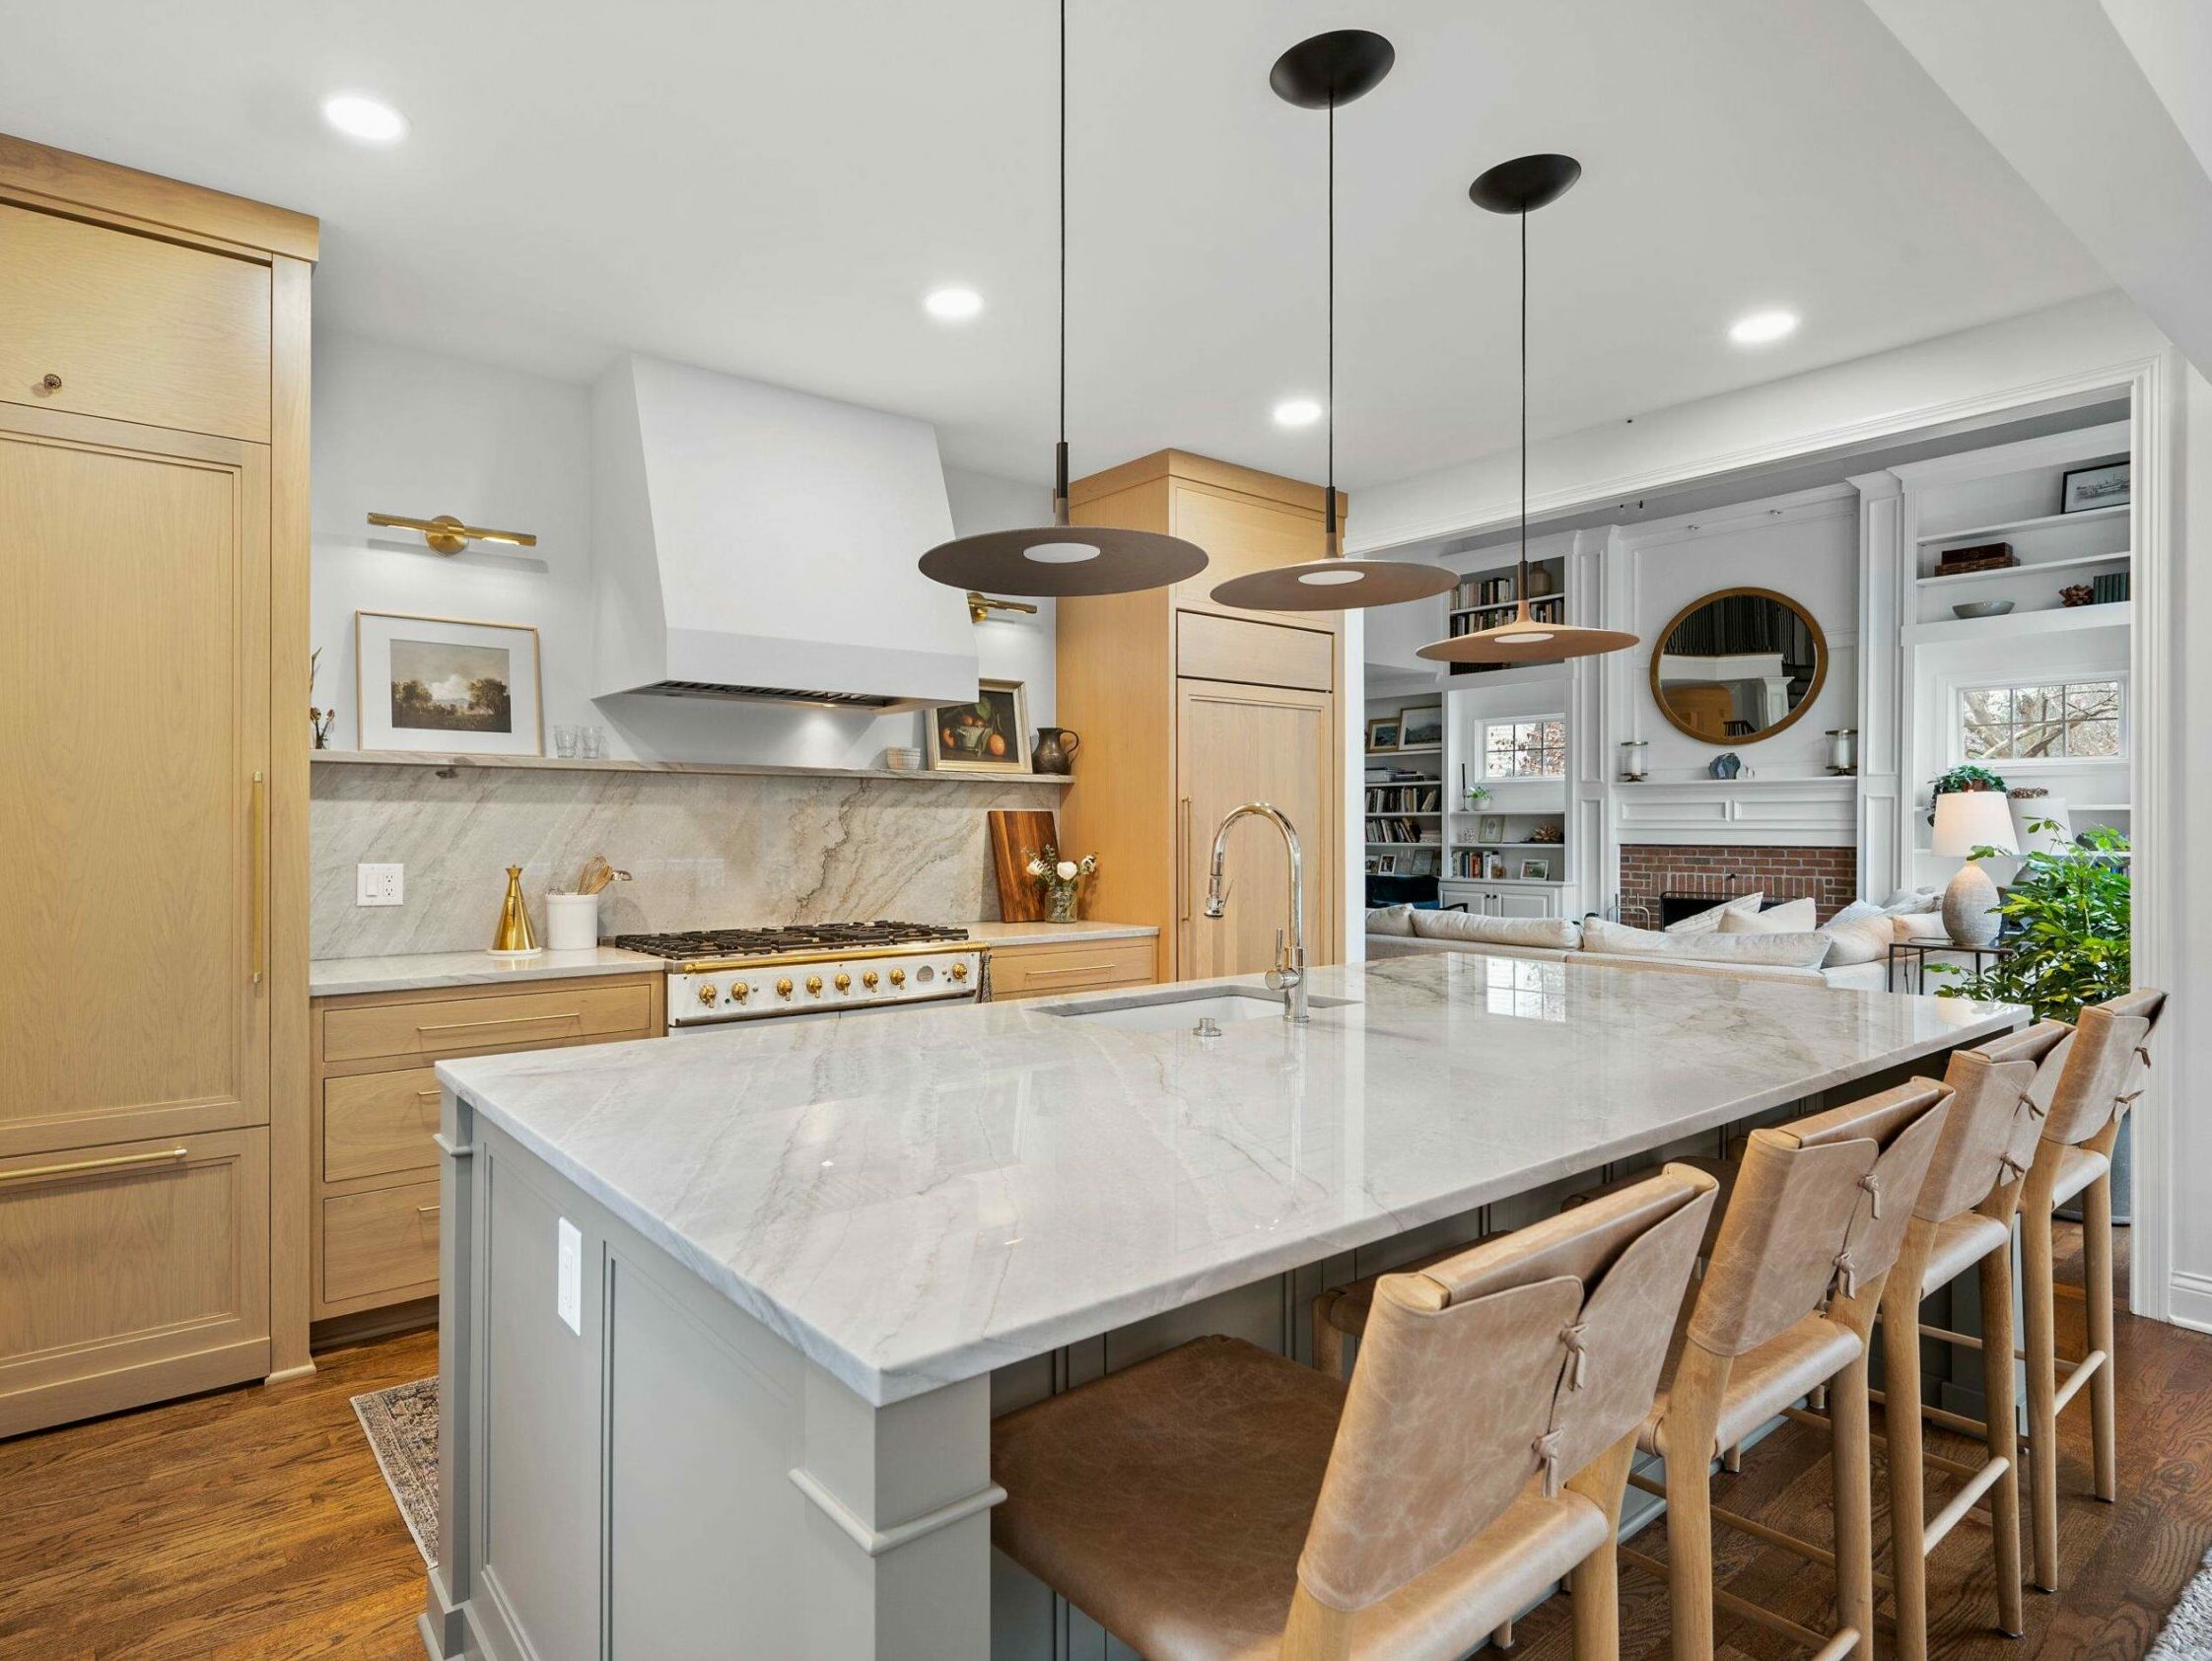 A bright and spacious kitchen featuring light wood cabinetry and a marble island